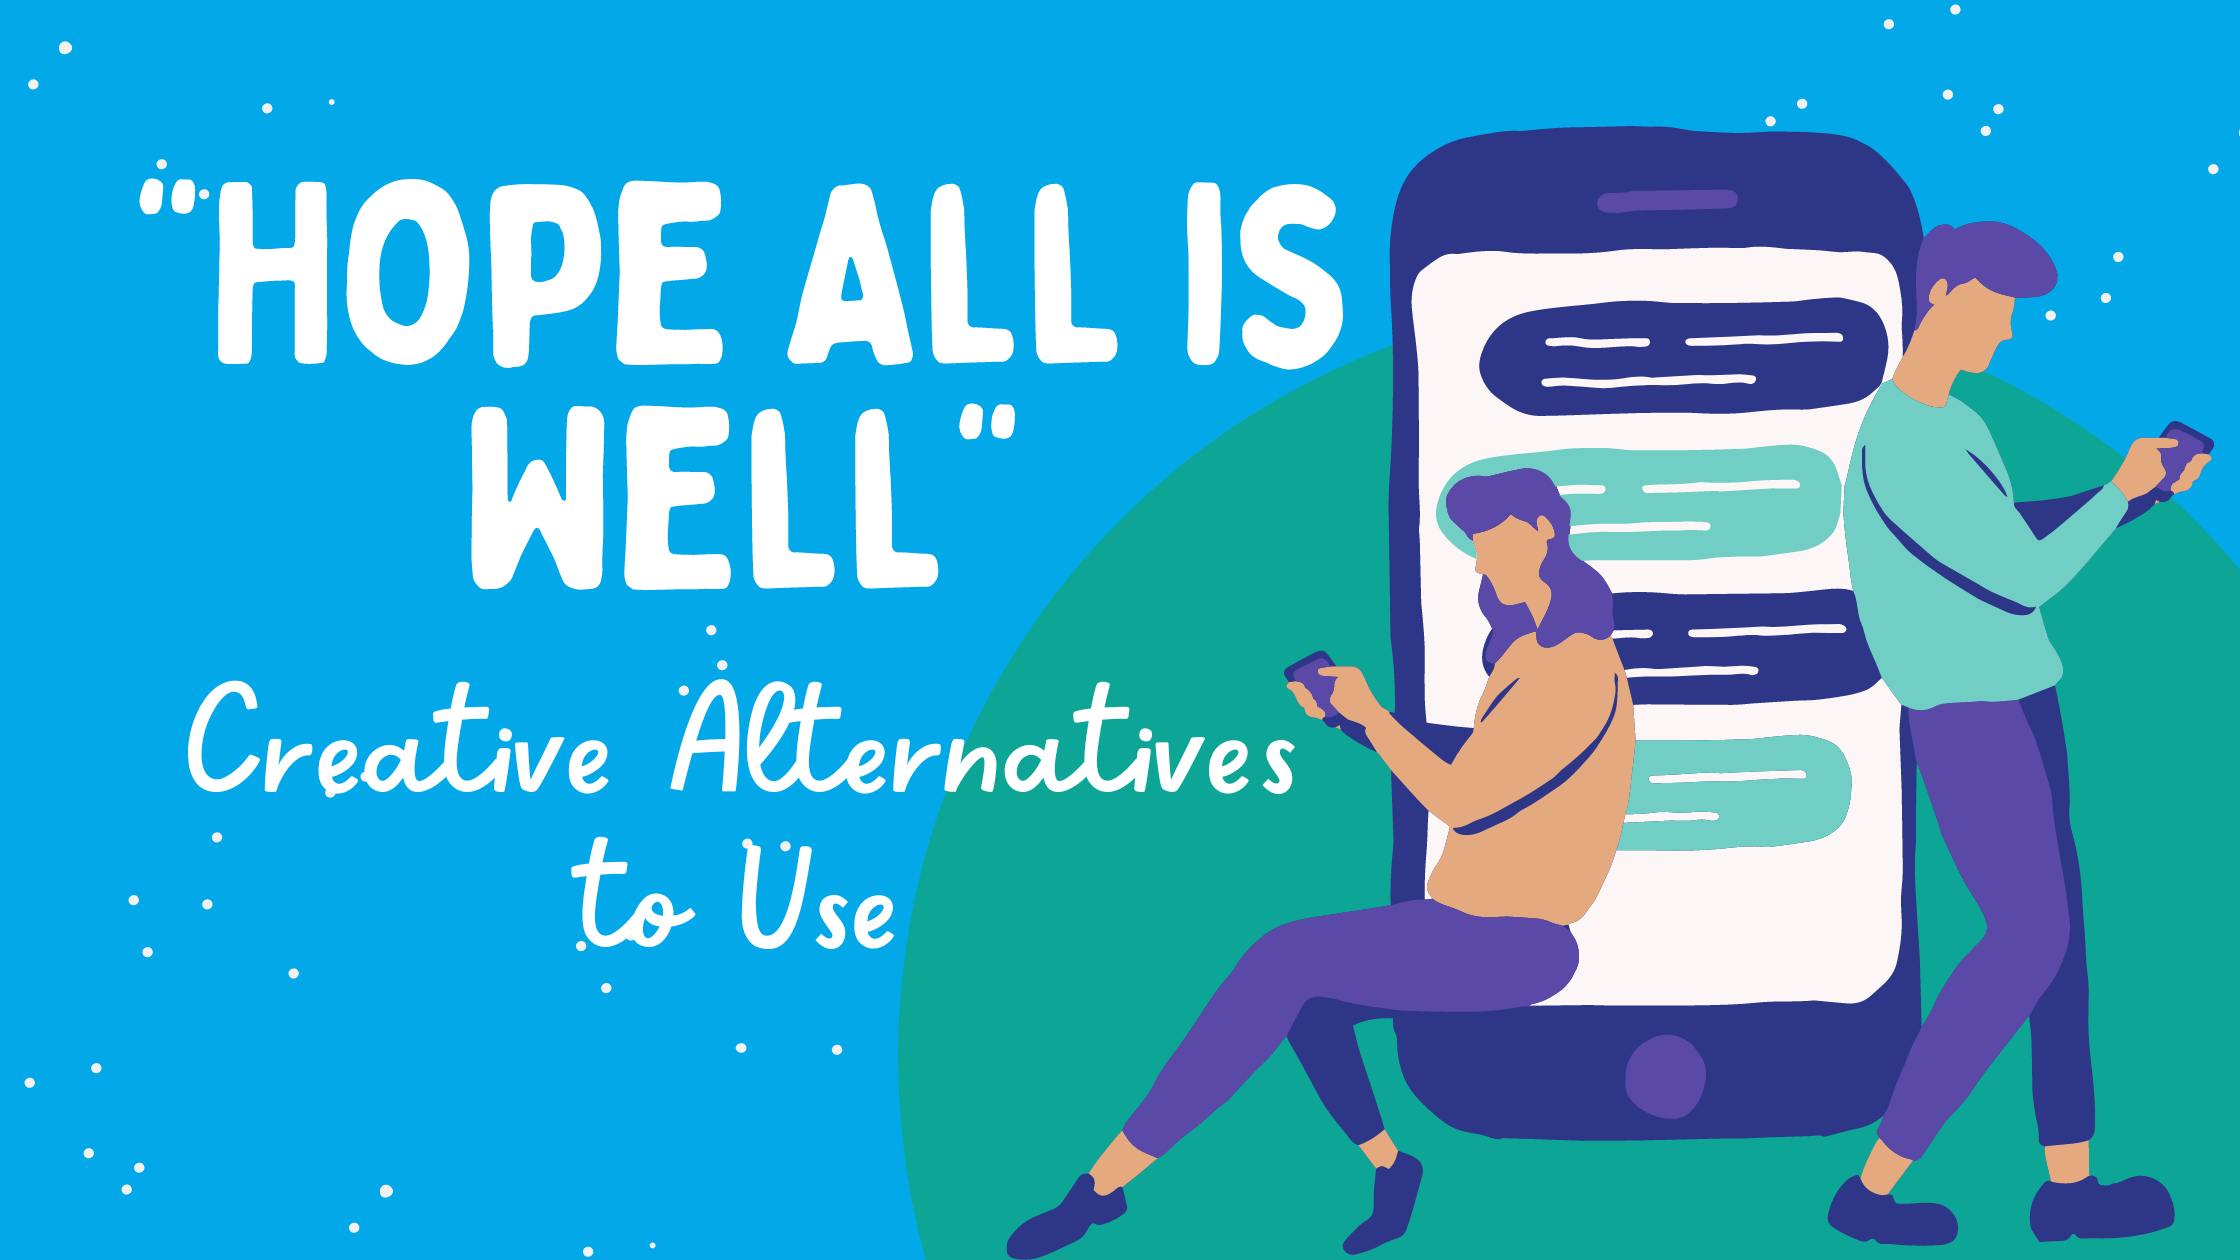 “Hope All is Well”: Creative Alternatives to Use